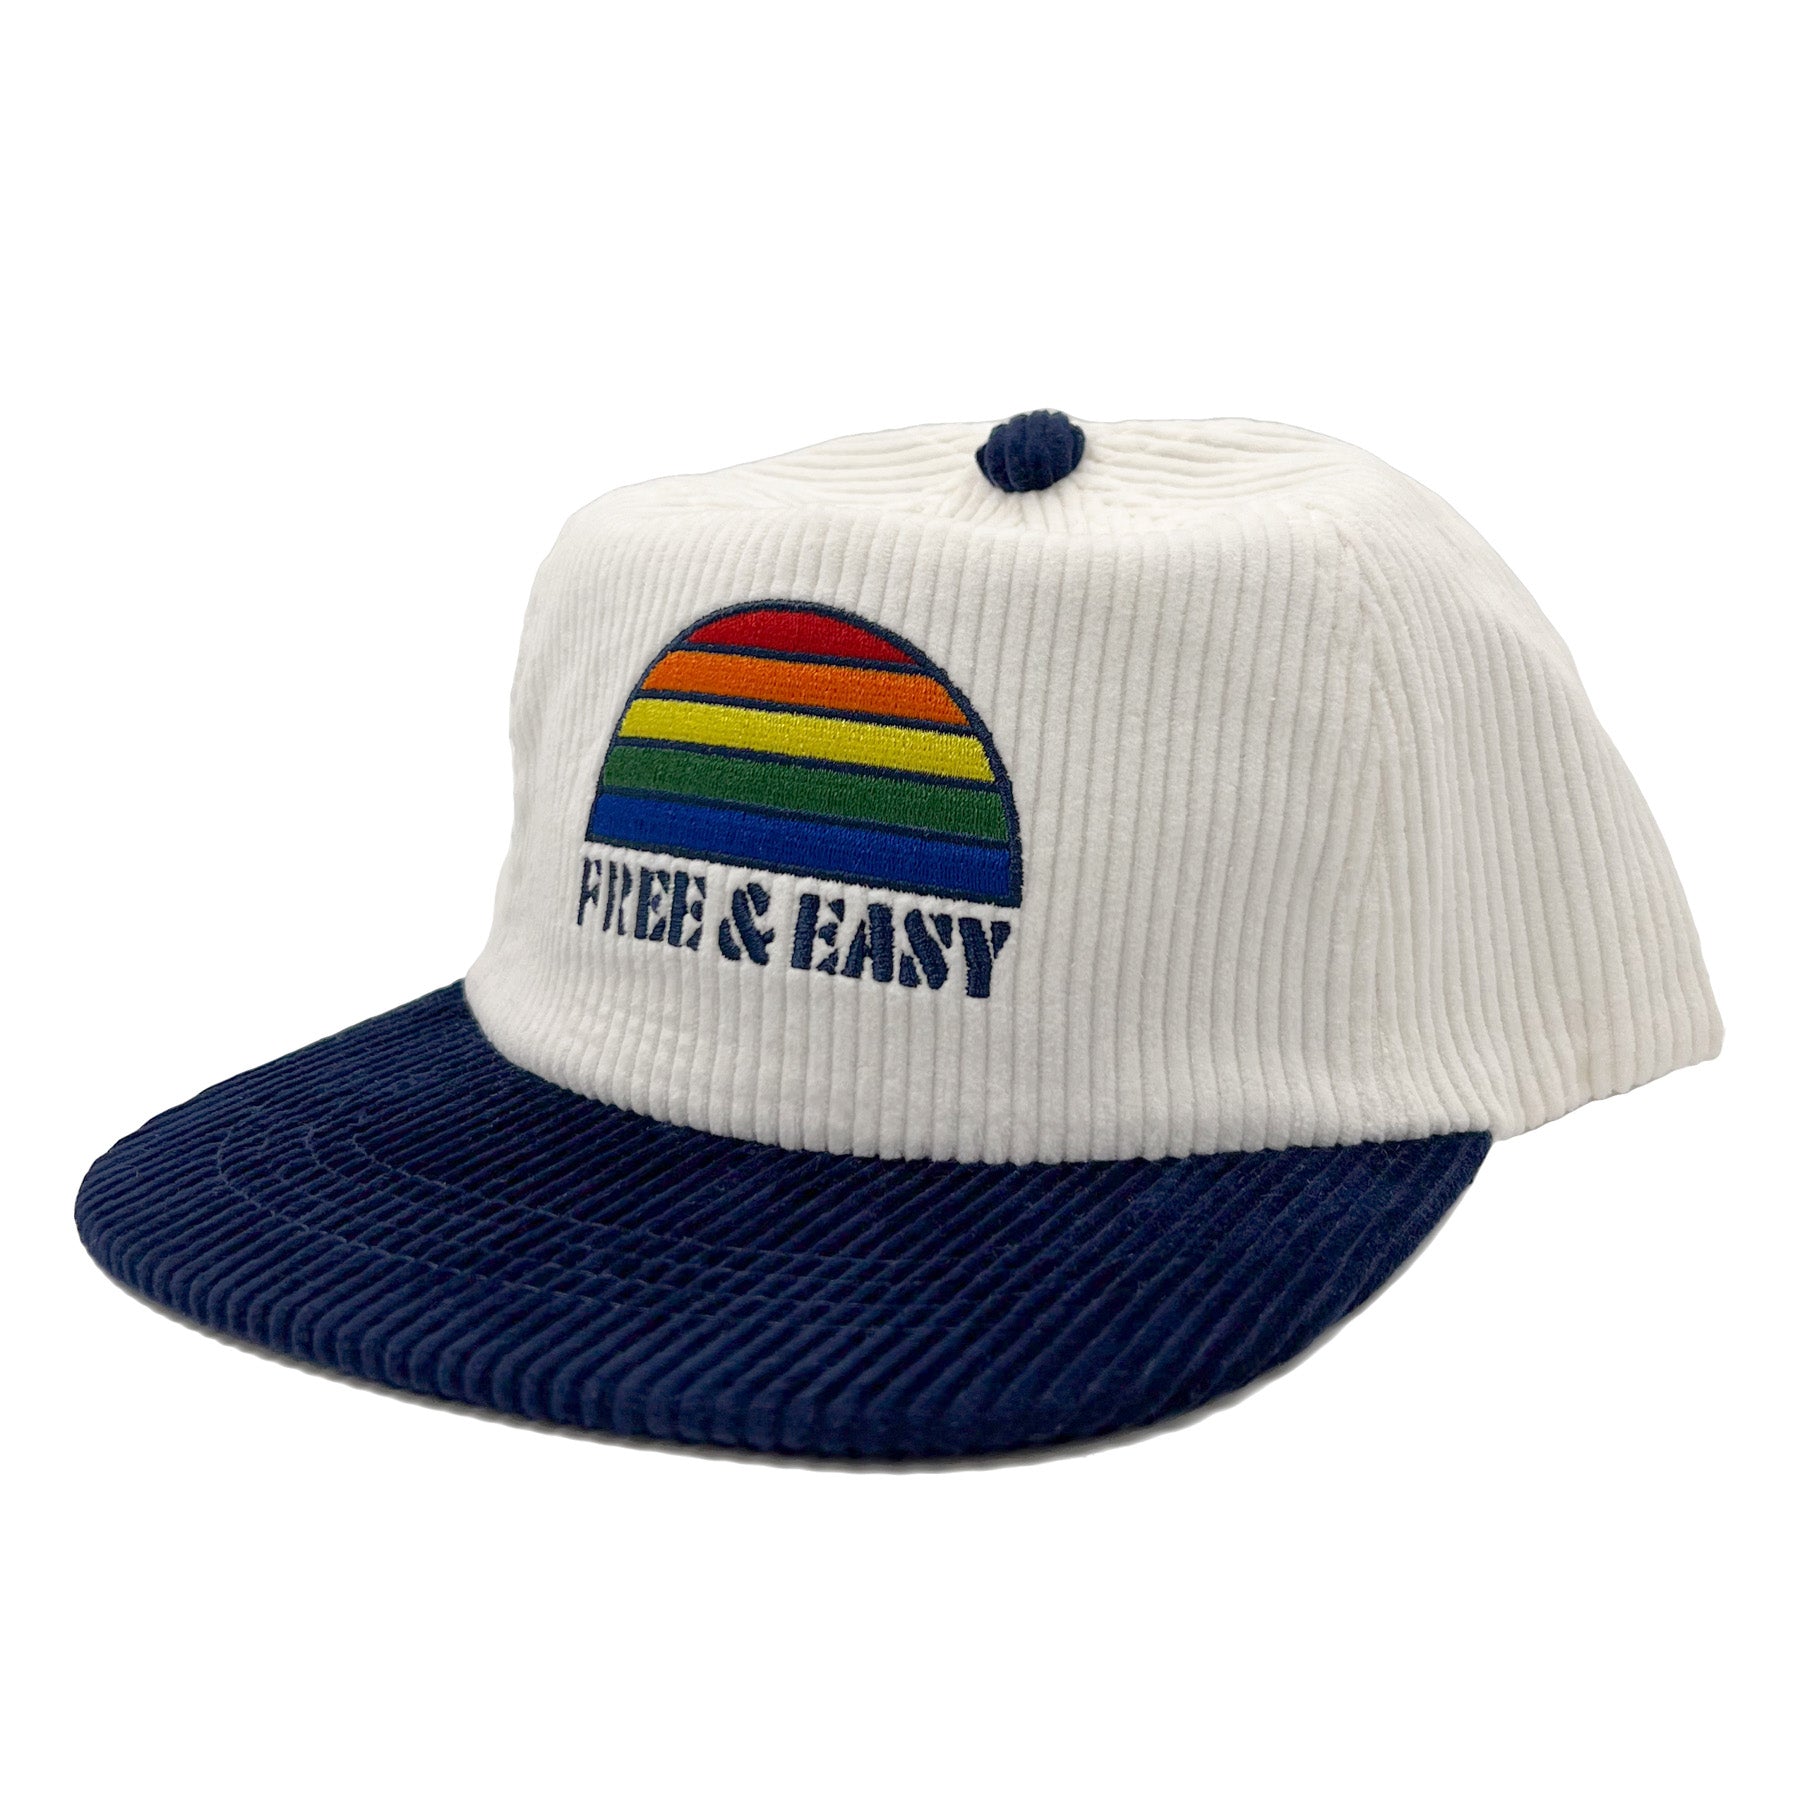 Rainbow Two Tone White and Navy Fat Corduroy Snapback Hat with rainbow embroidery and navy Free & Easy logo on a white background - Free & Easy